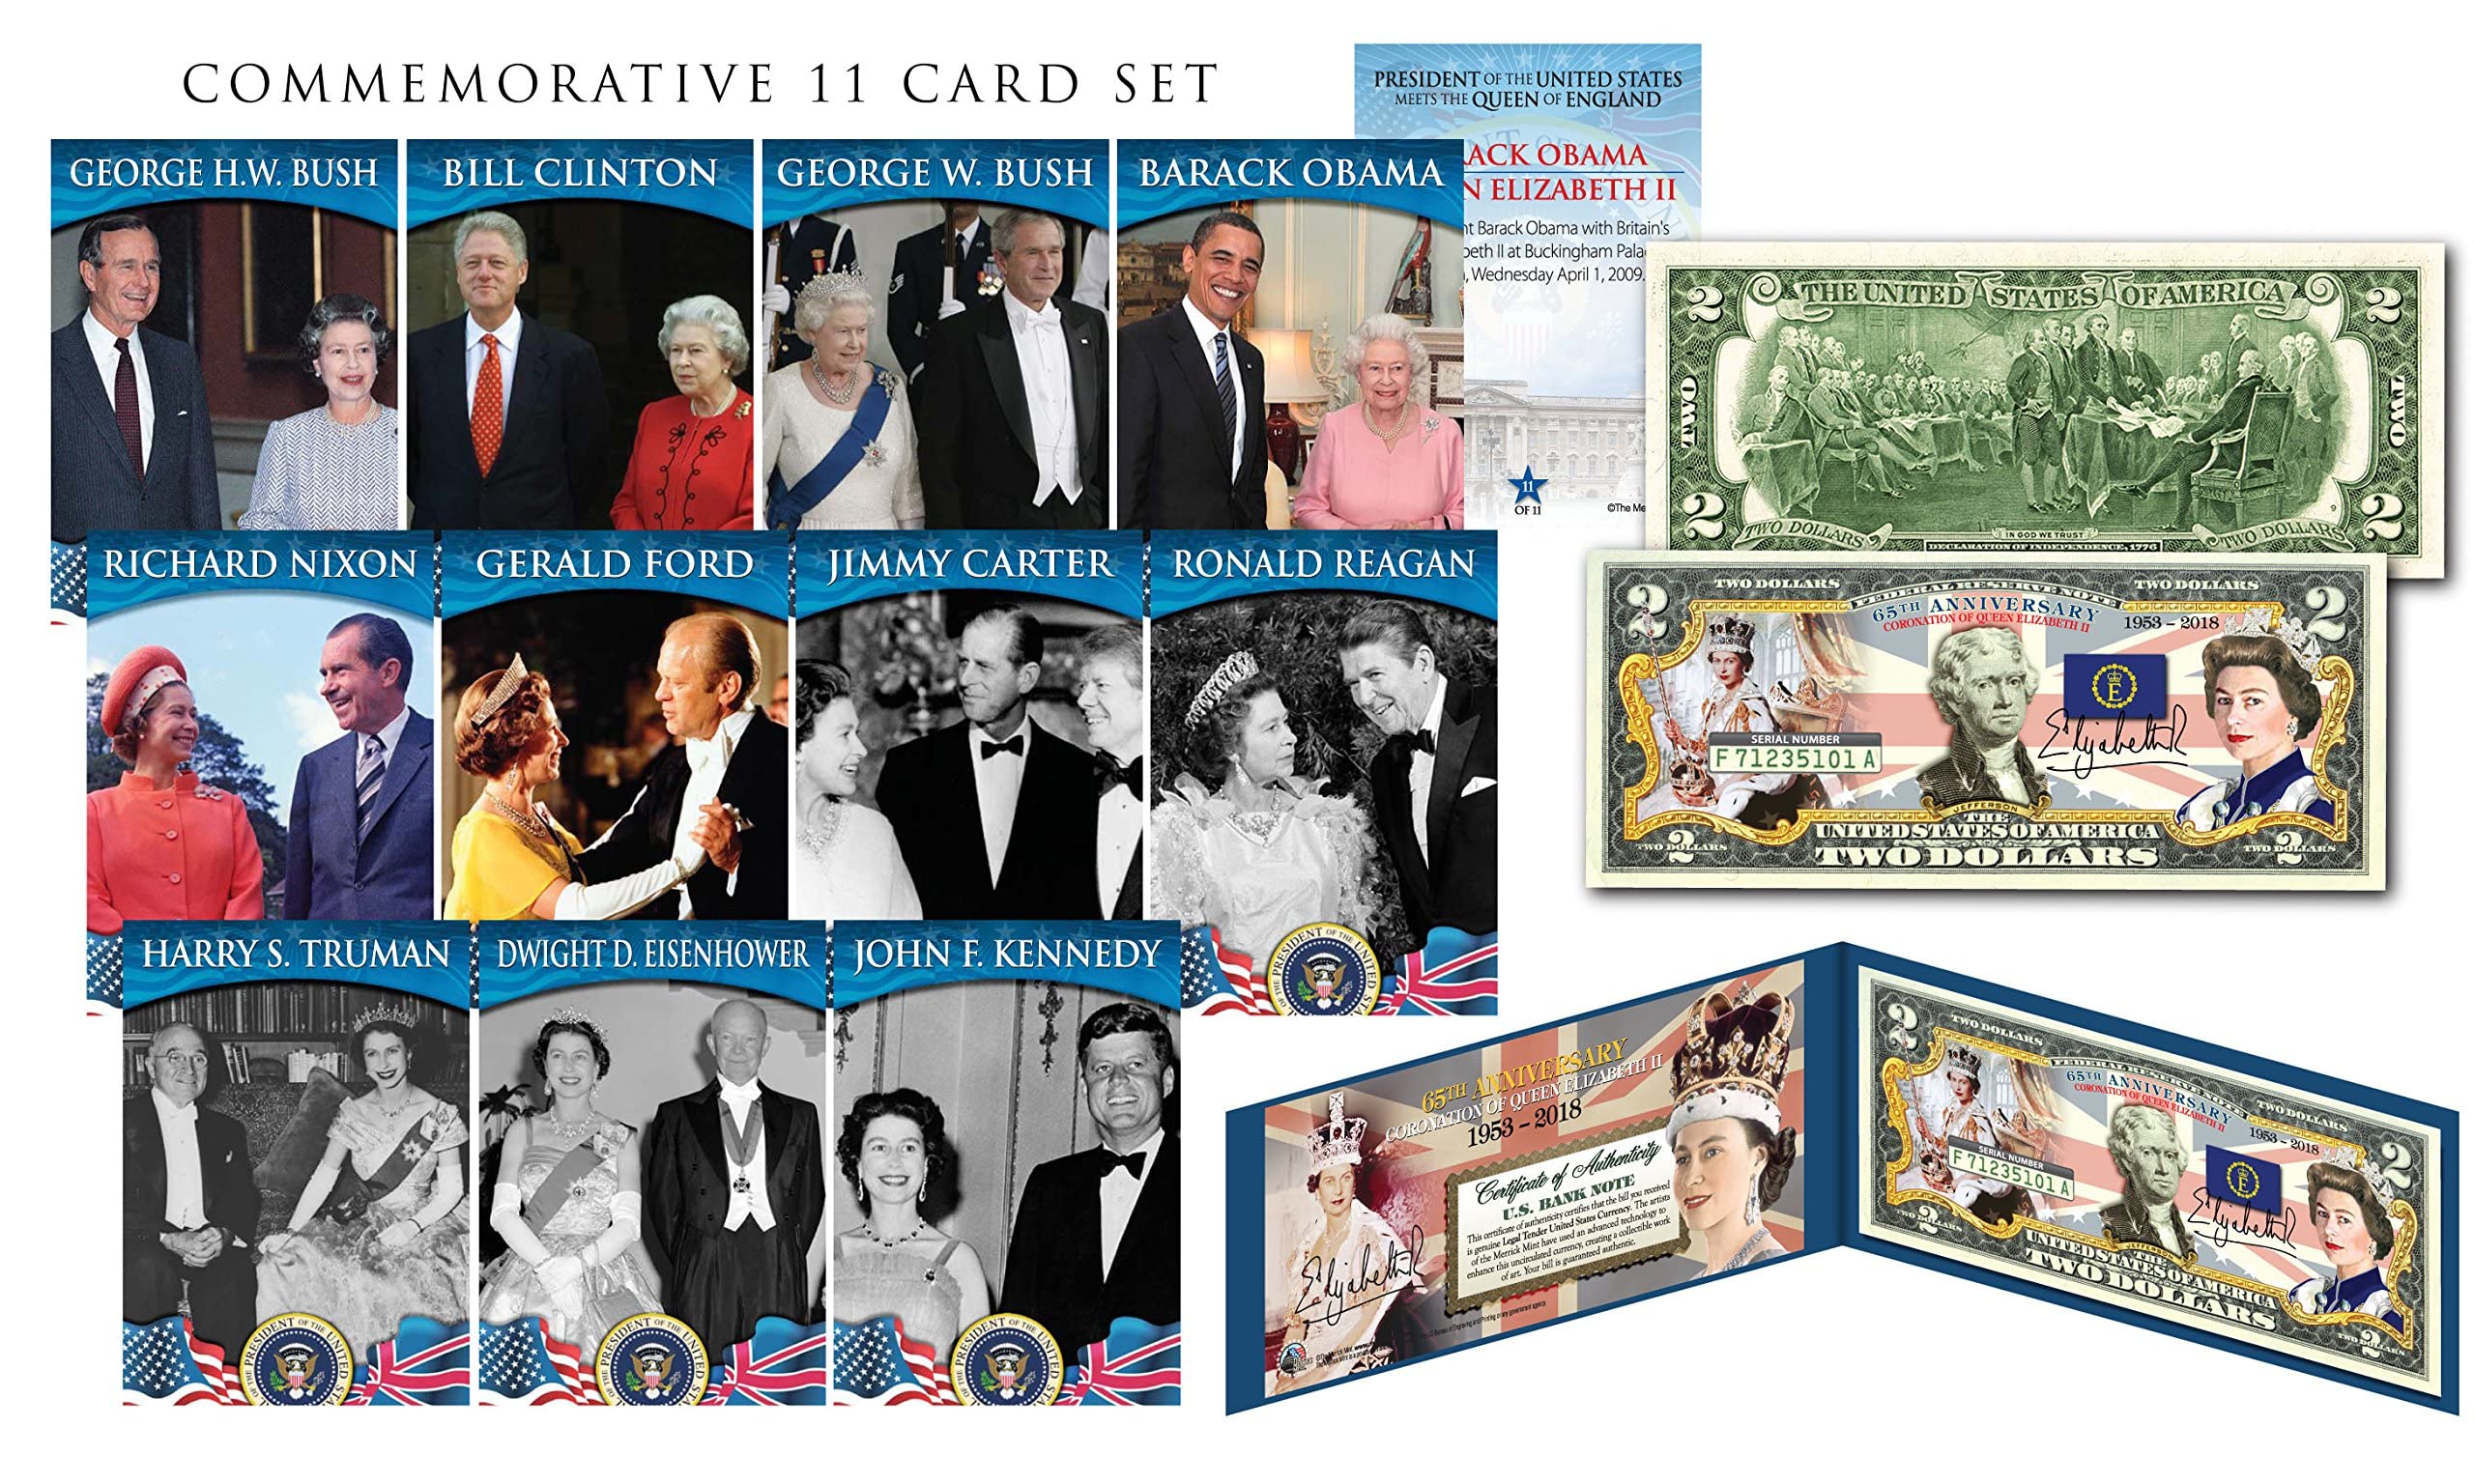 Queen Elizabeth II 65th Anniversary Coronation Colorized $2 Federal Reserve Note Display Folio with Free 11-Card Trading Card Set